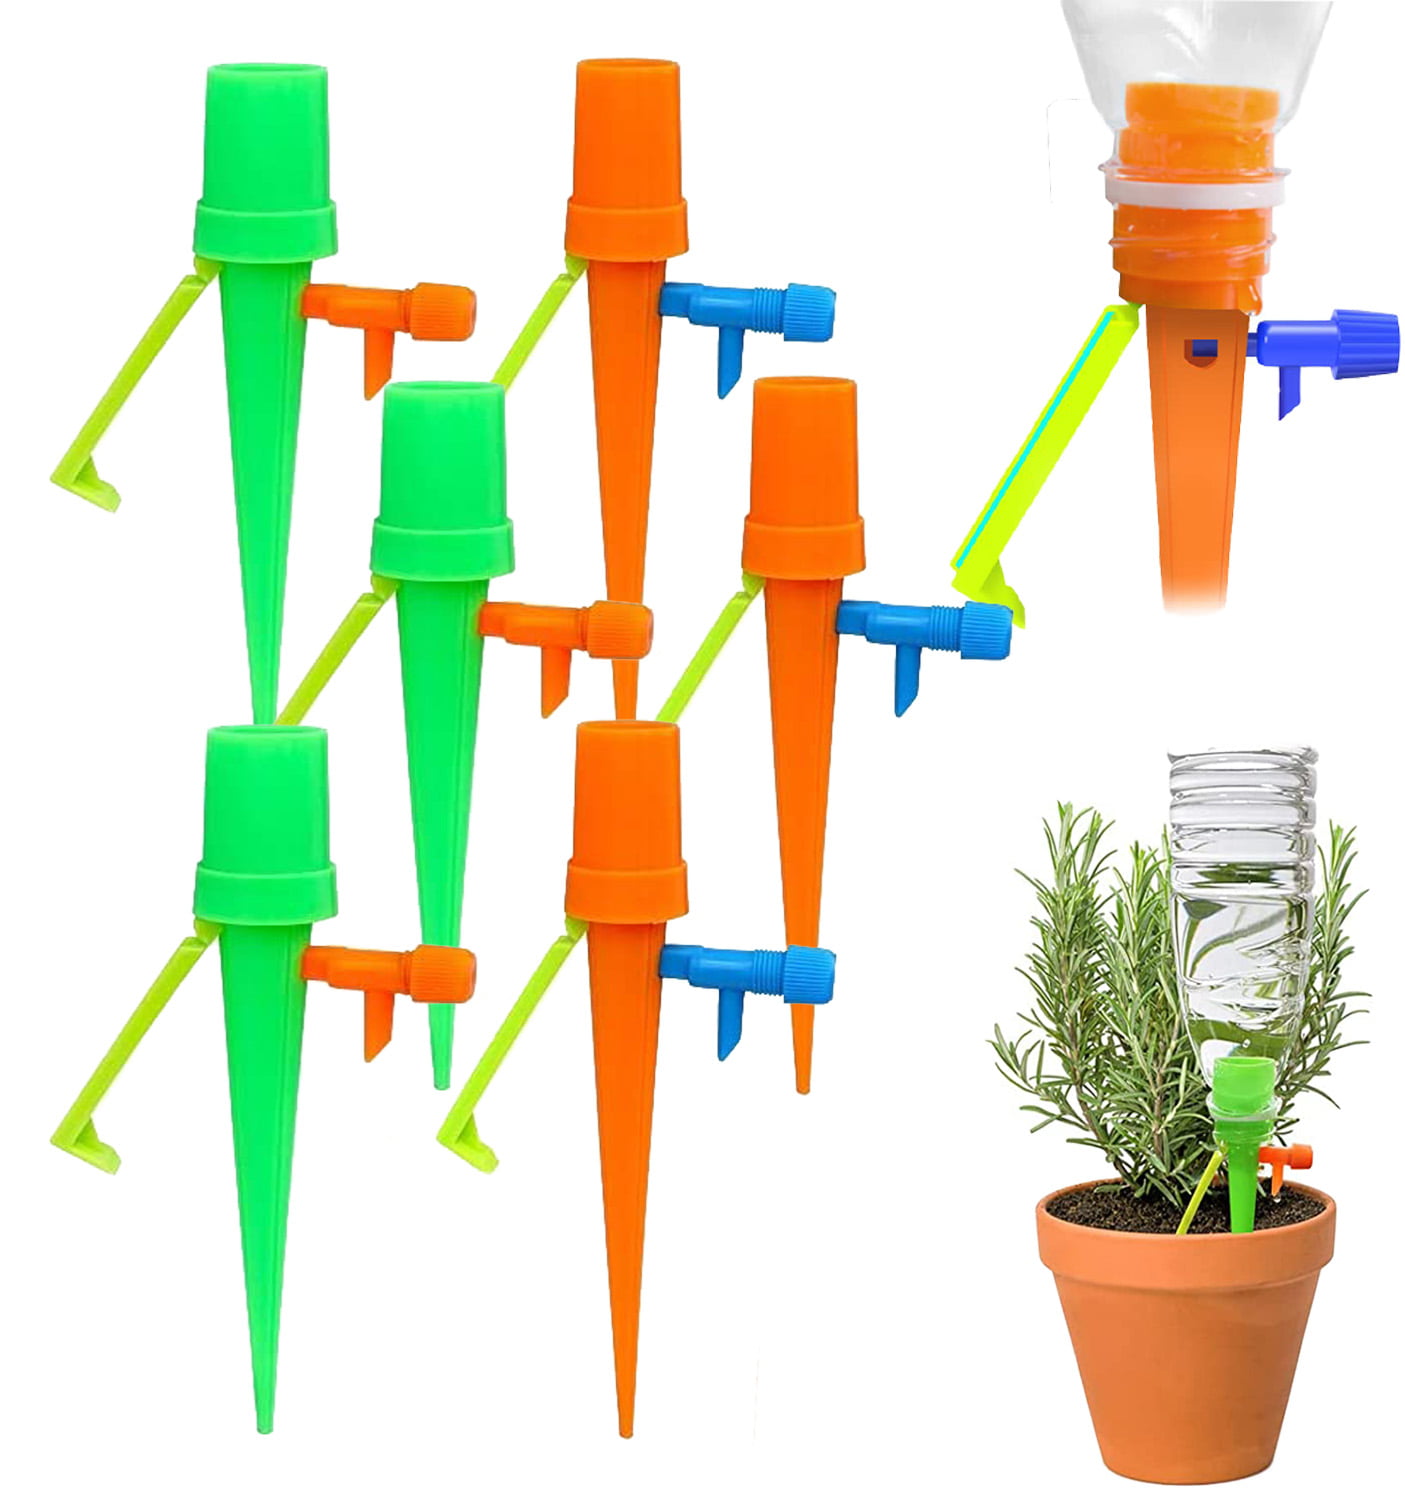 Hanging Baskets Gray 6 Pcs Plant Self Watering Spikes with Control Valve Switch Auto Drip Irrigation Slow-Release Vacation Plants Watering System for Potted Plants Houseplants Patio Plants 